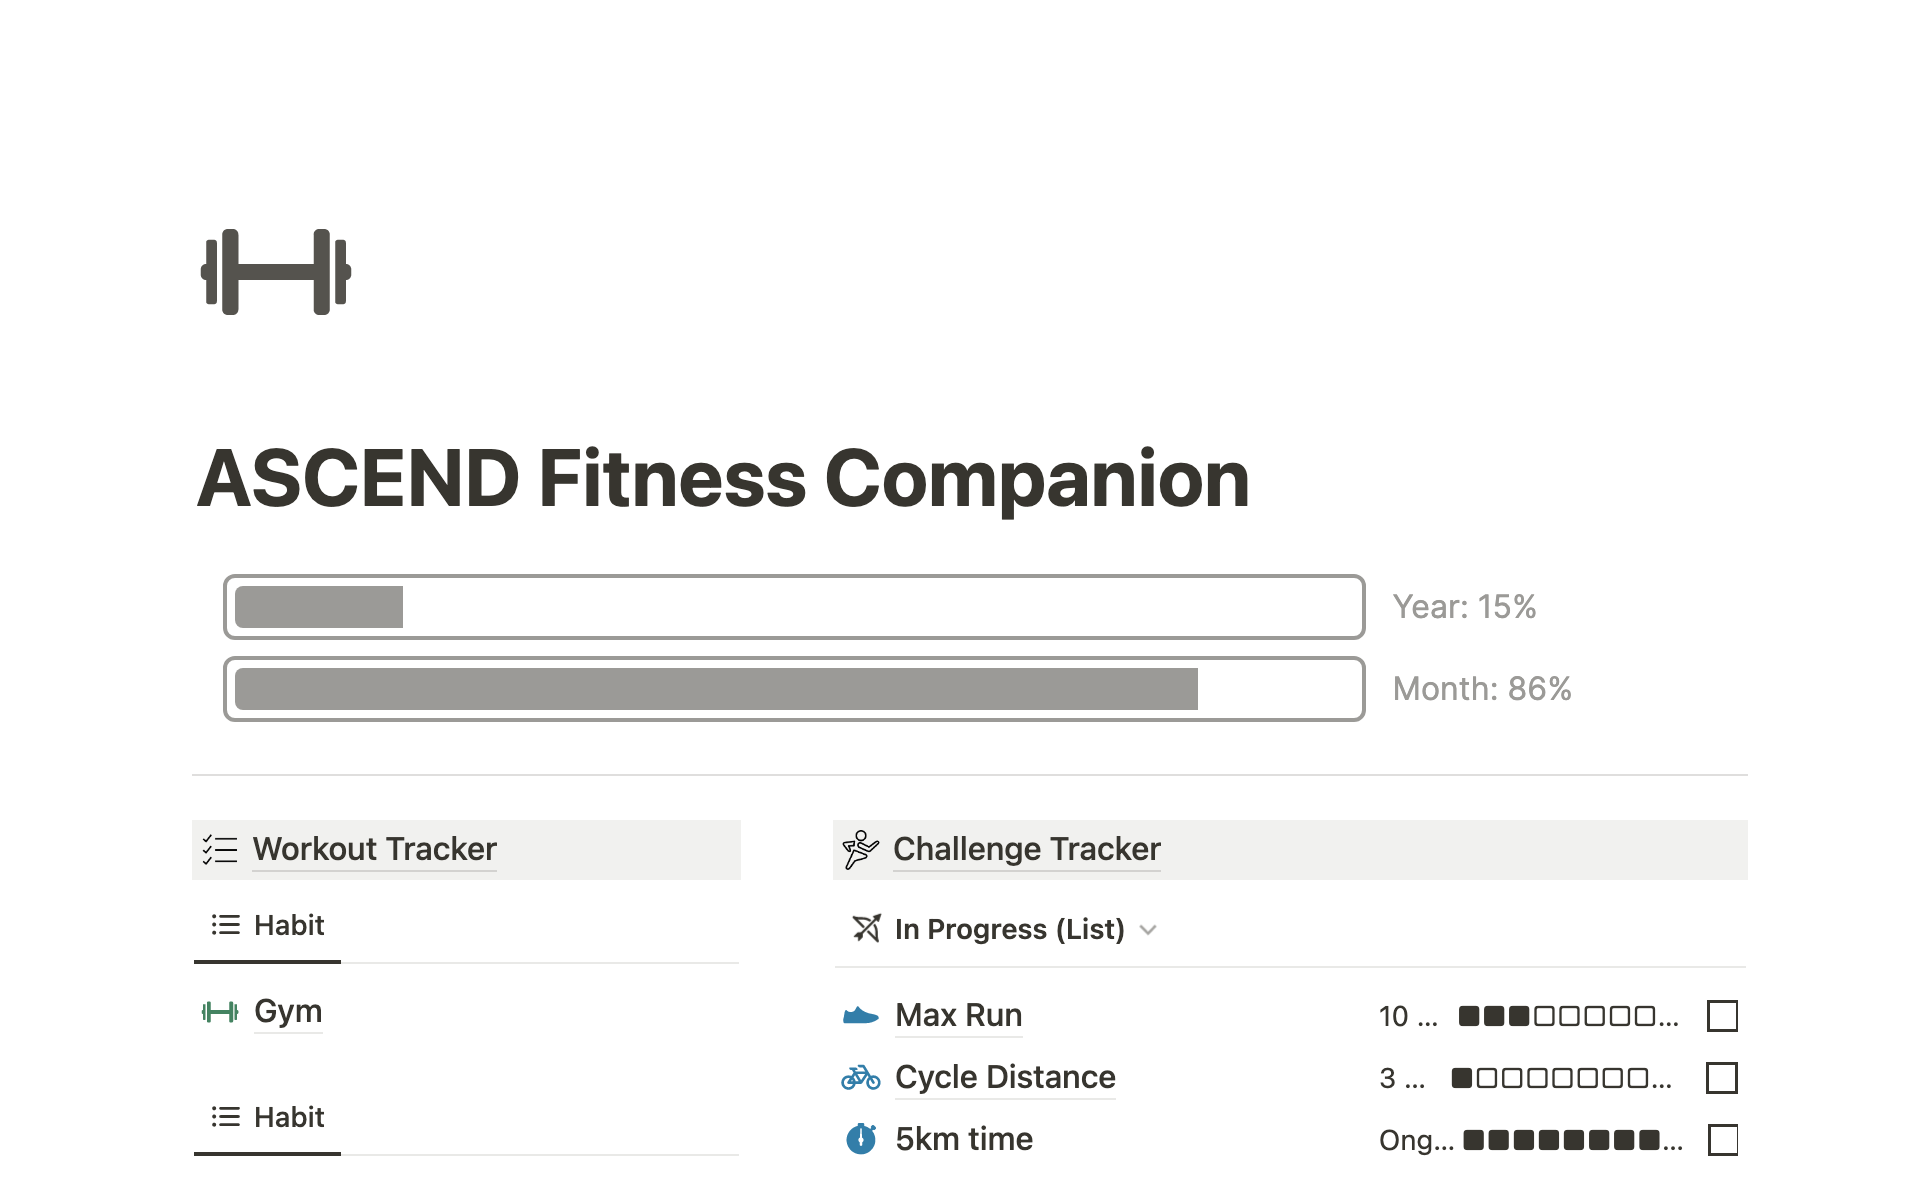 A fitness companion tool to track progress, create challenges & set targets, allowing you to have complete control over your fitness journey